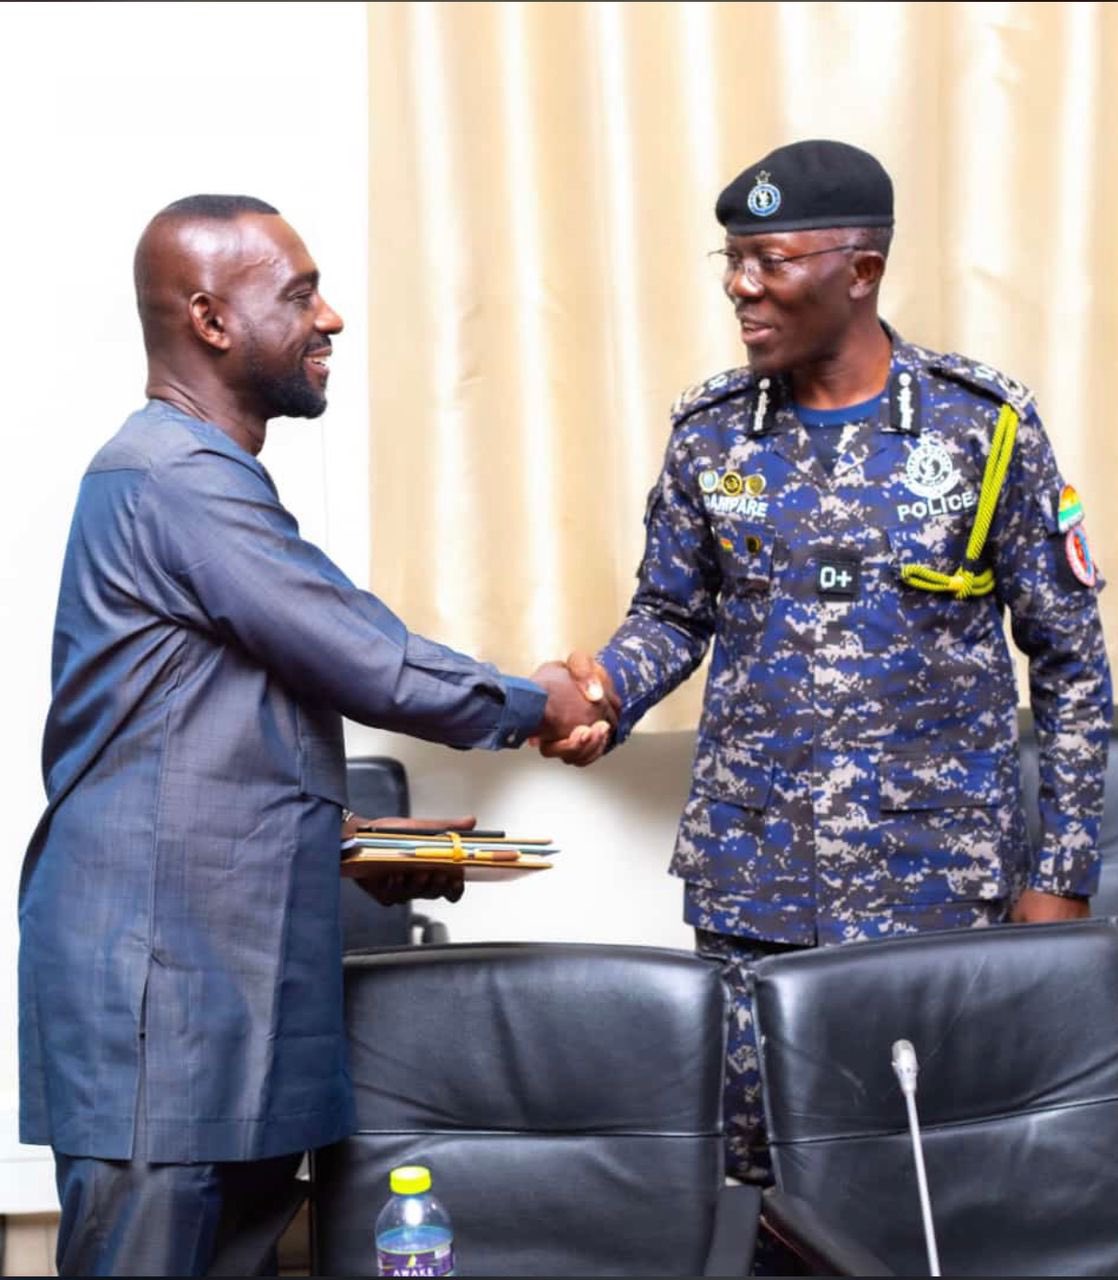 Dampare shakes the hand of COP George Alex Mensah.